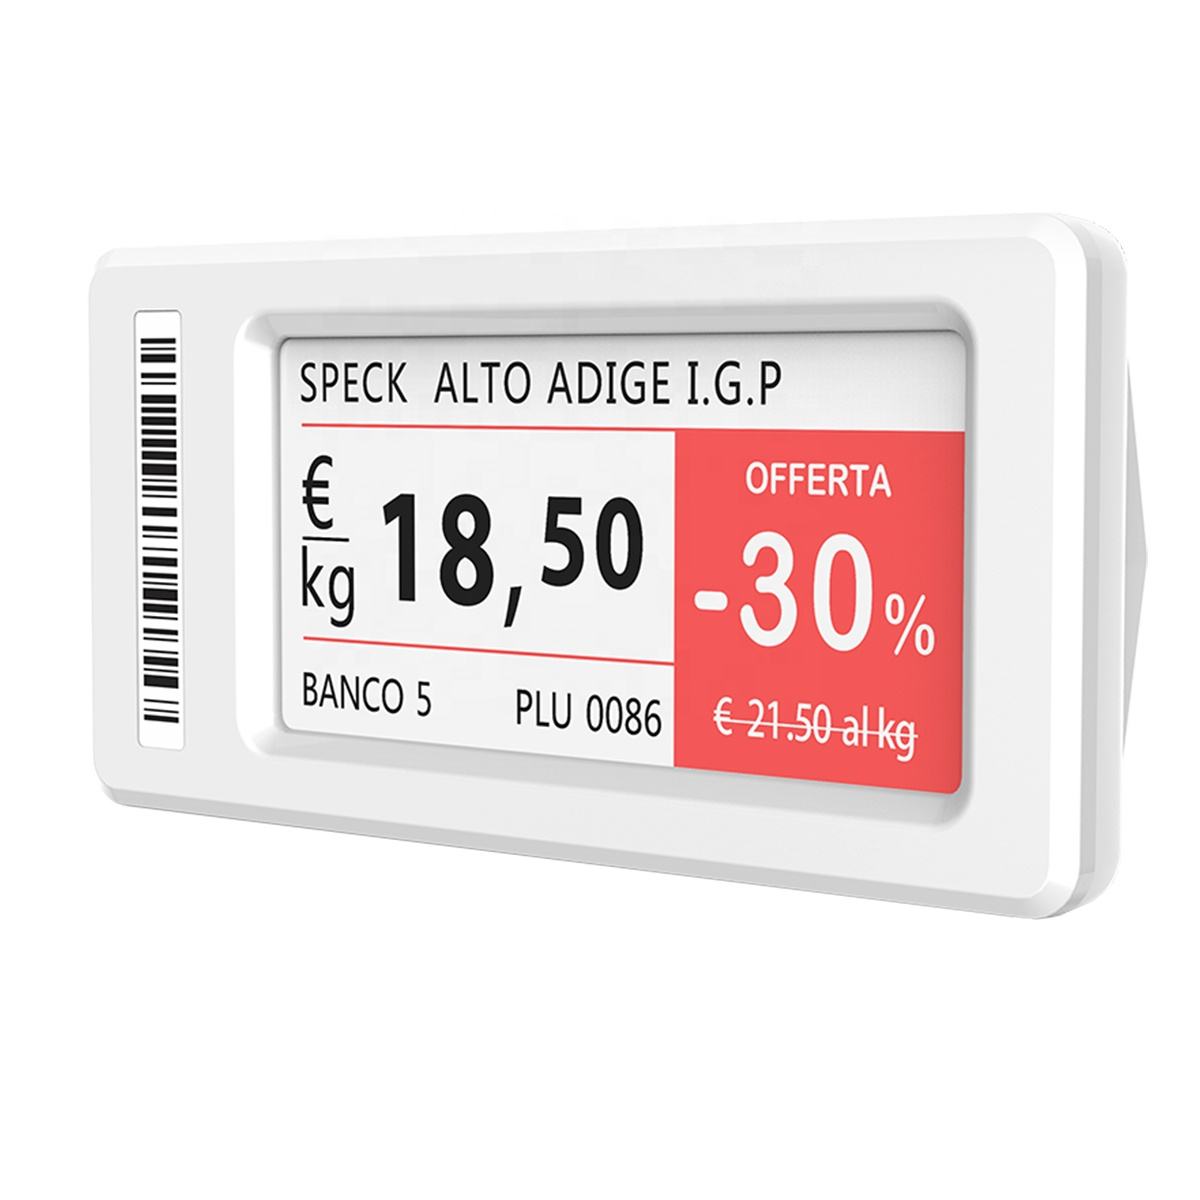 Electronic Tags Digital Smart Price Label